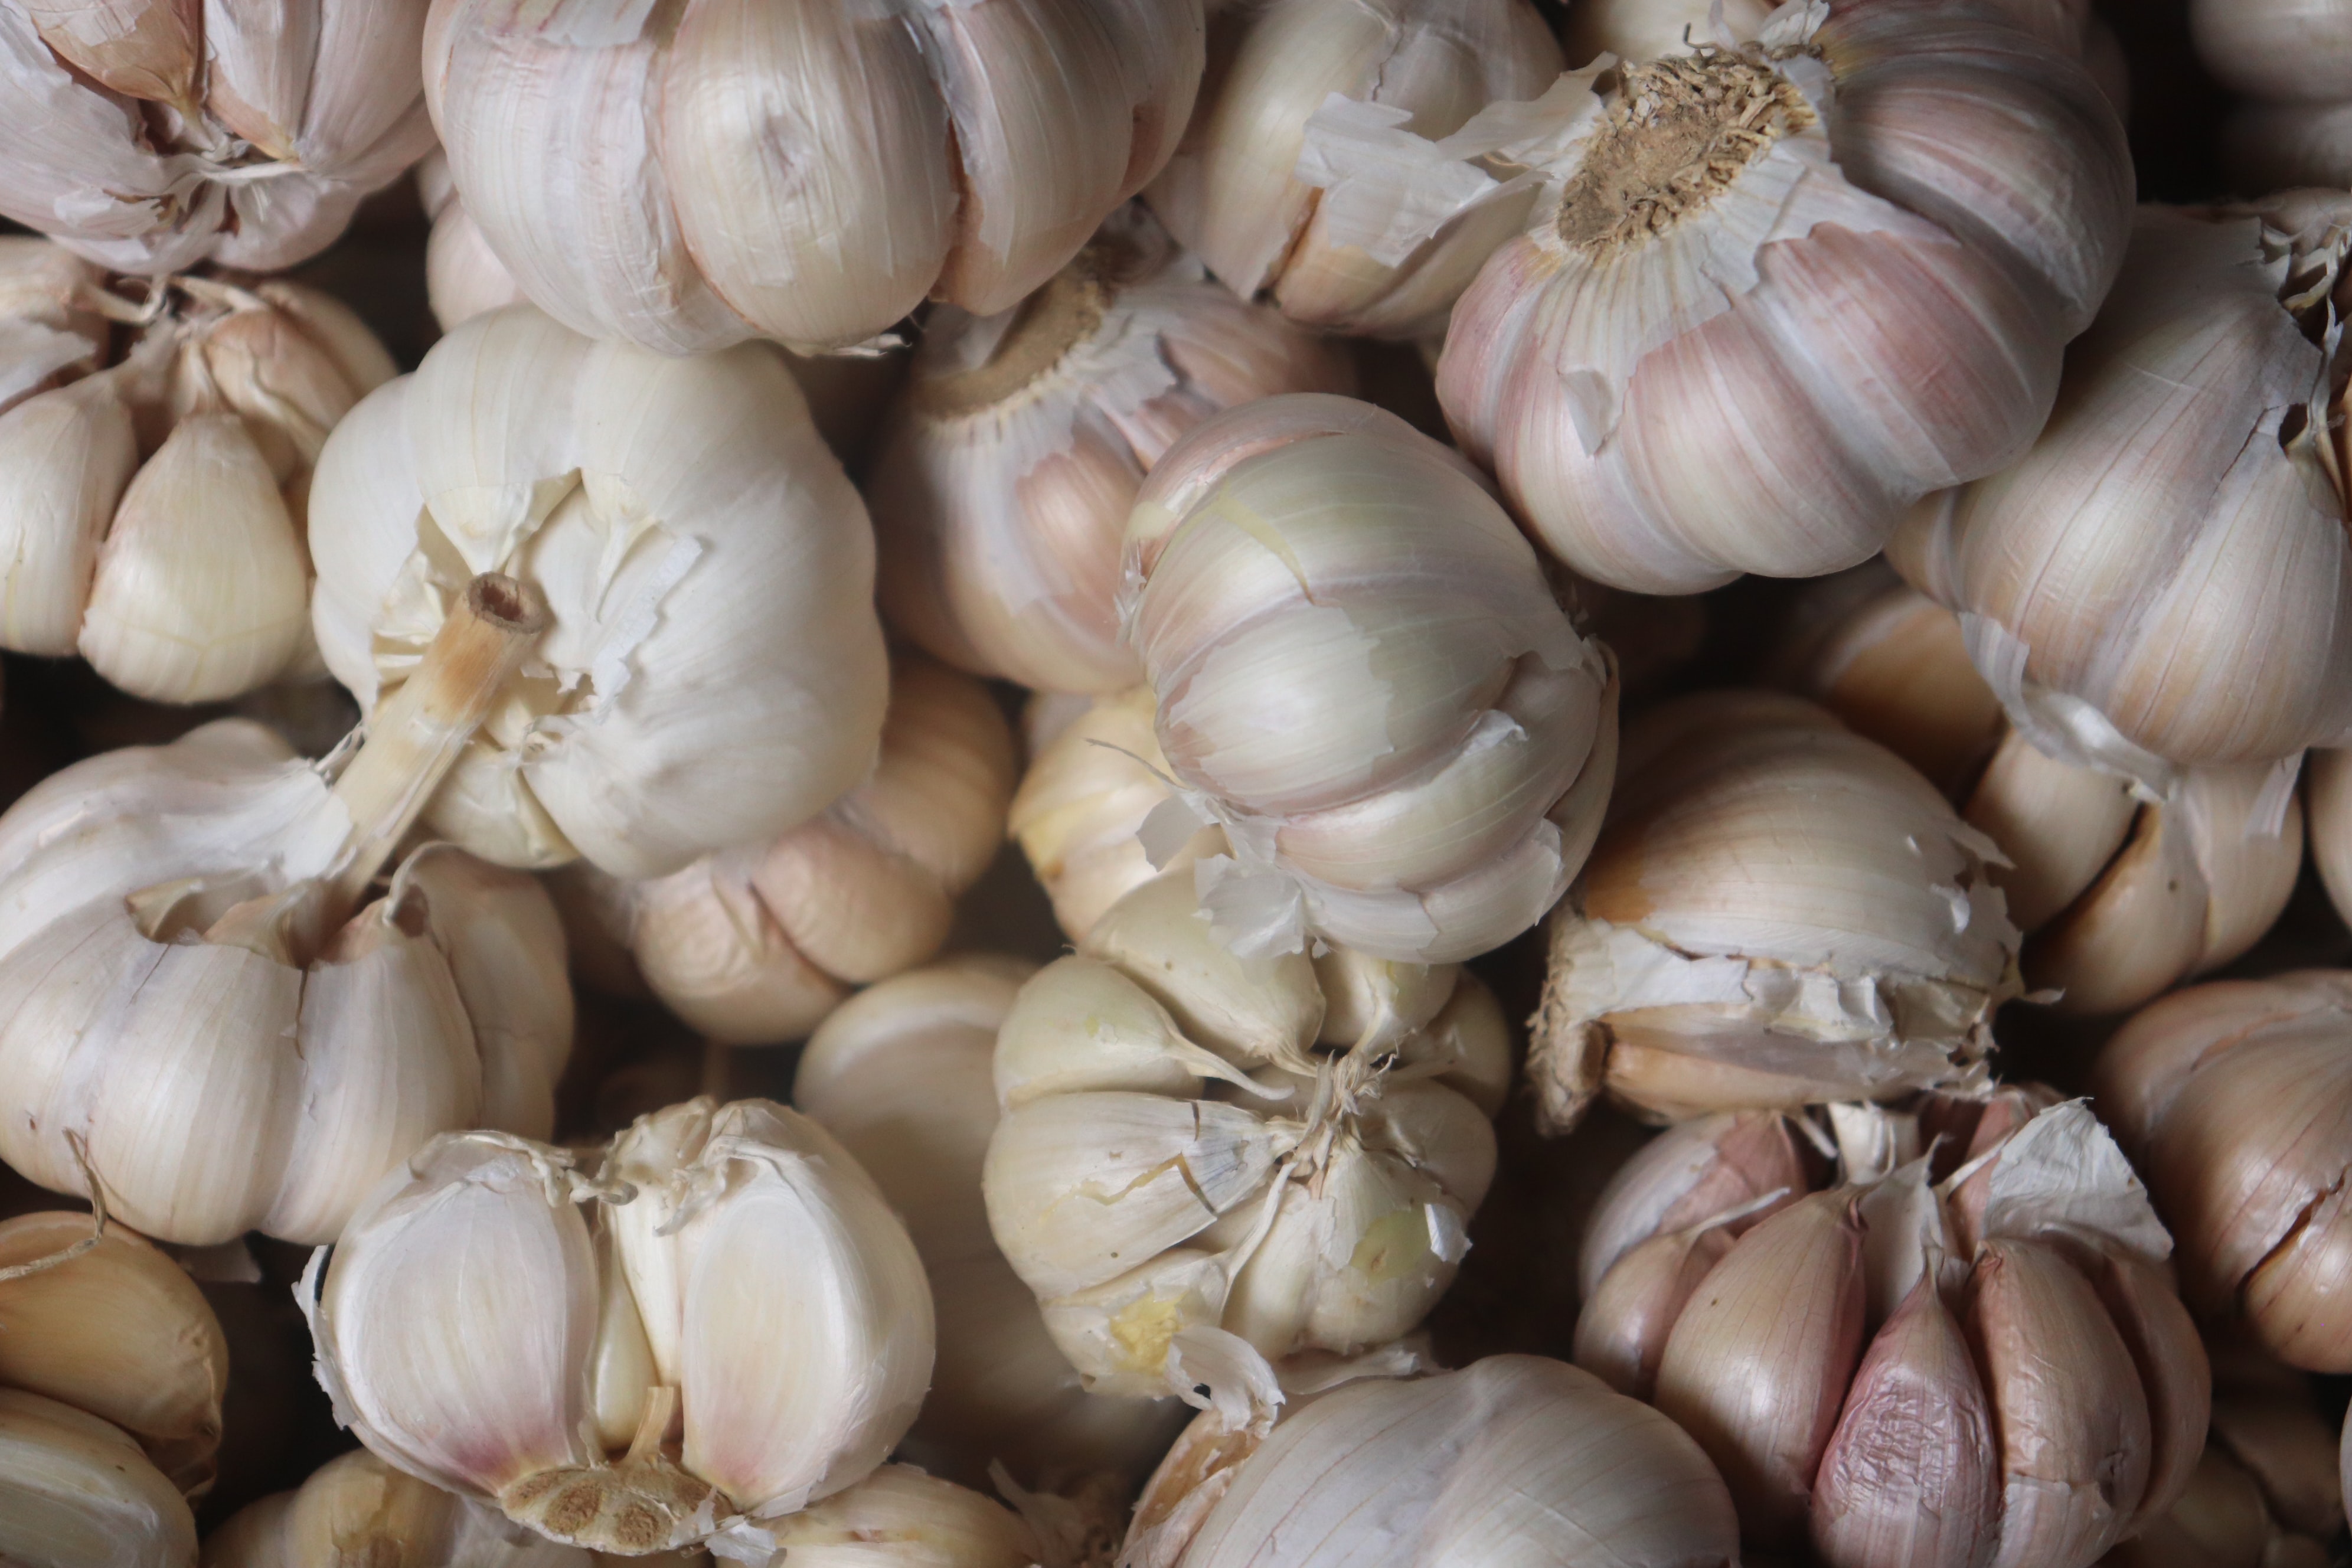 Garlic bulbs piled on top of each other covering the whole image